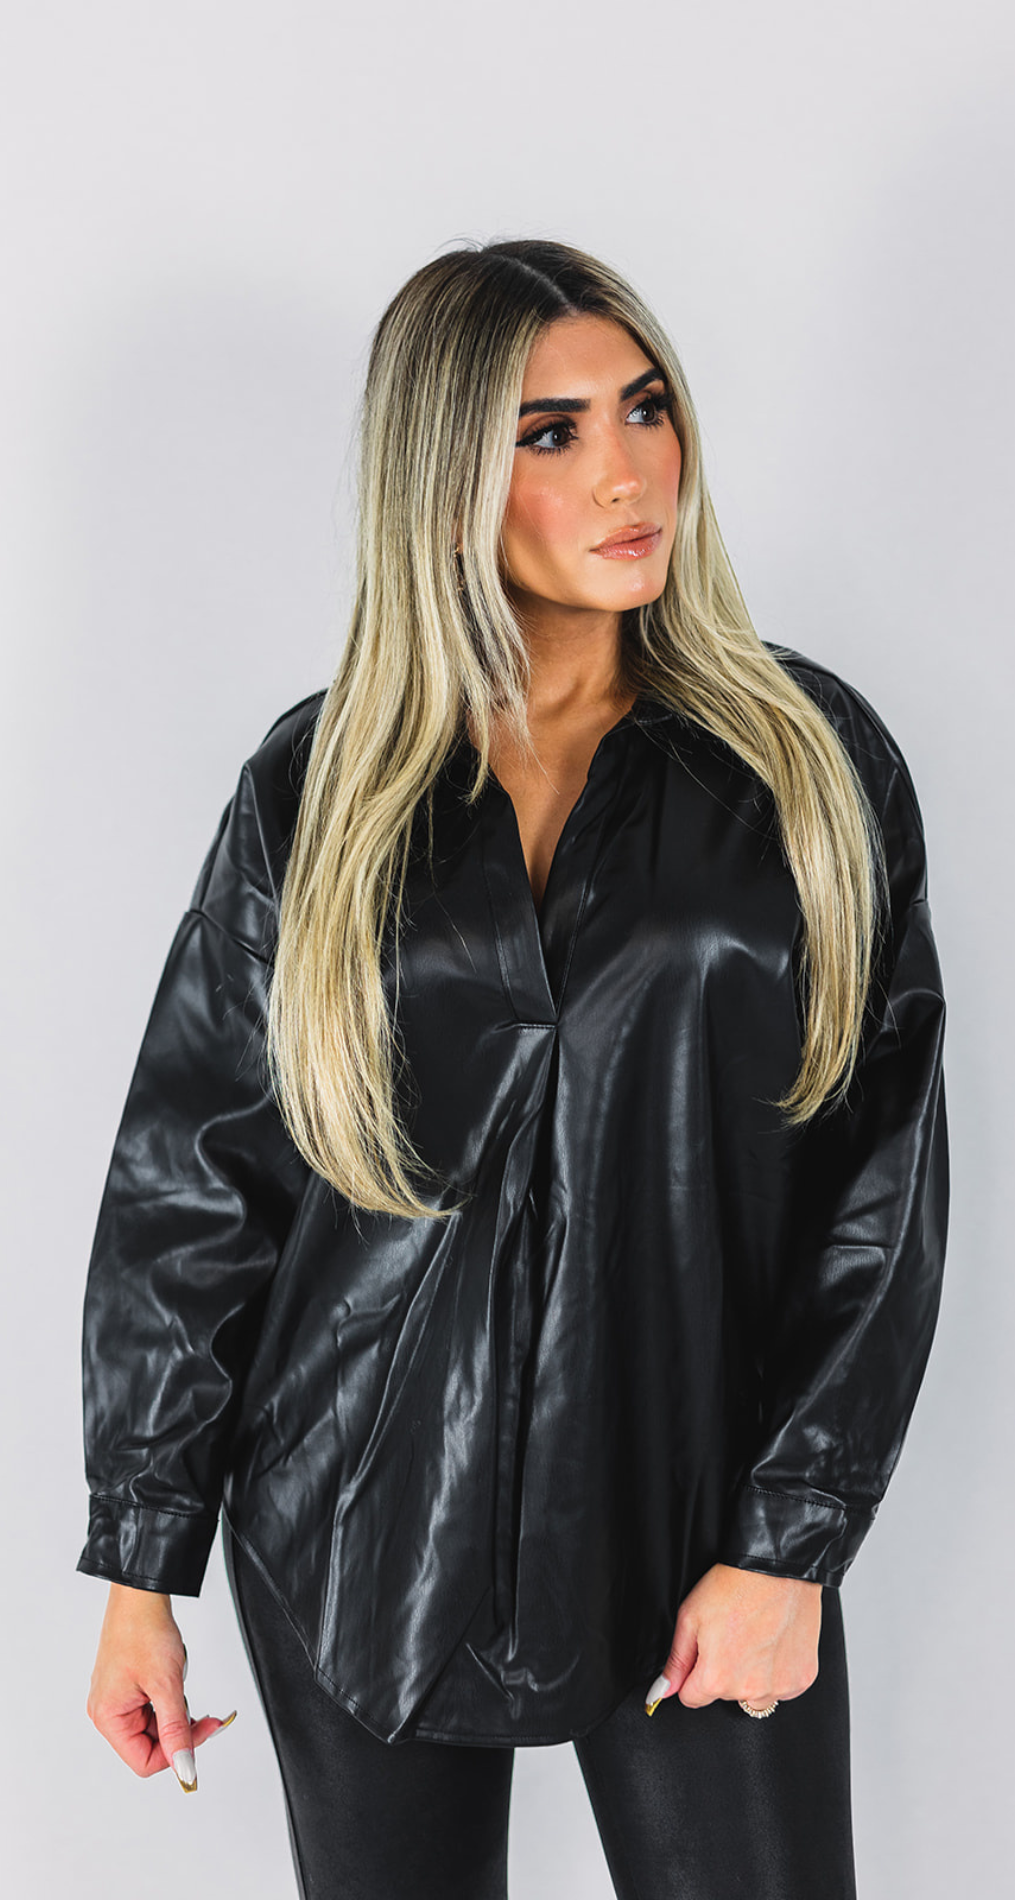 OVERSIZED FAUX LEATHER TOP